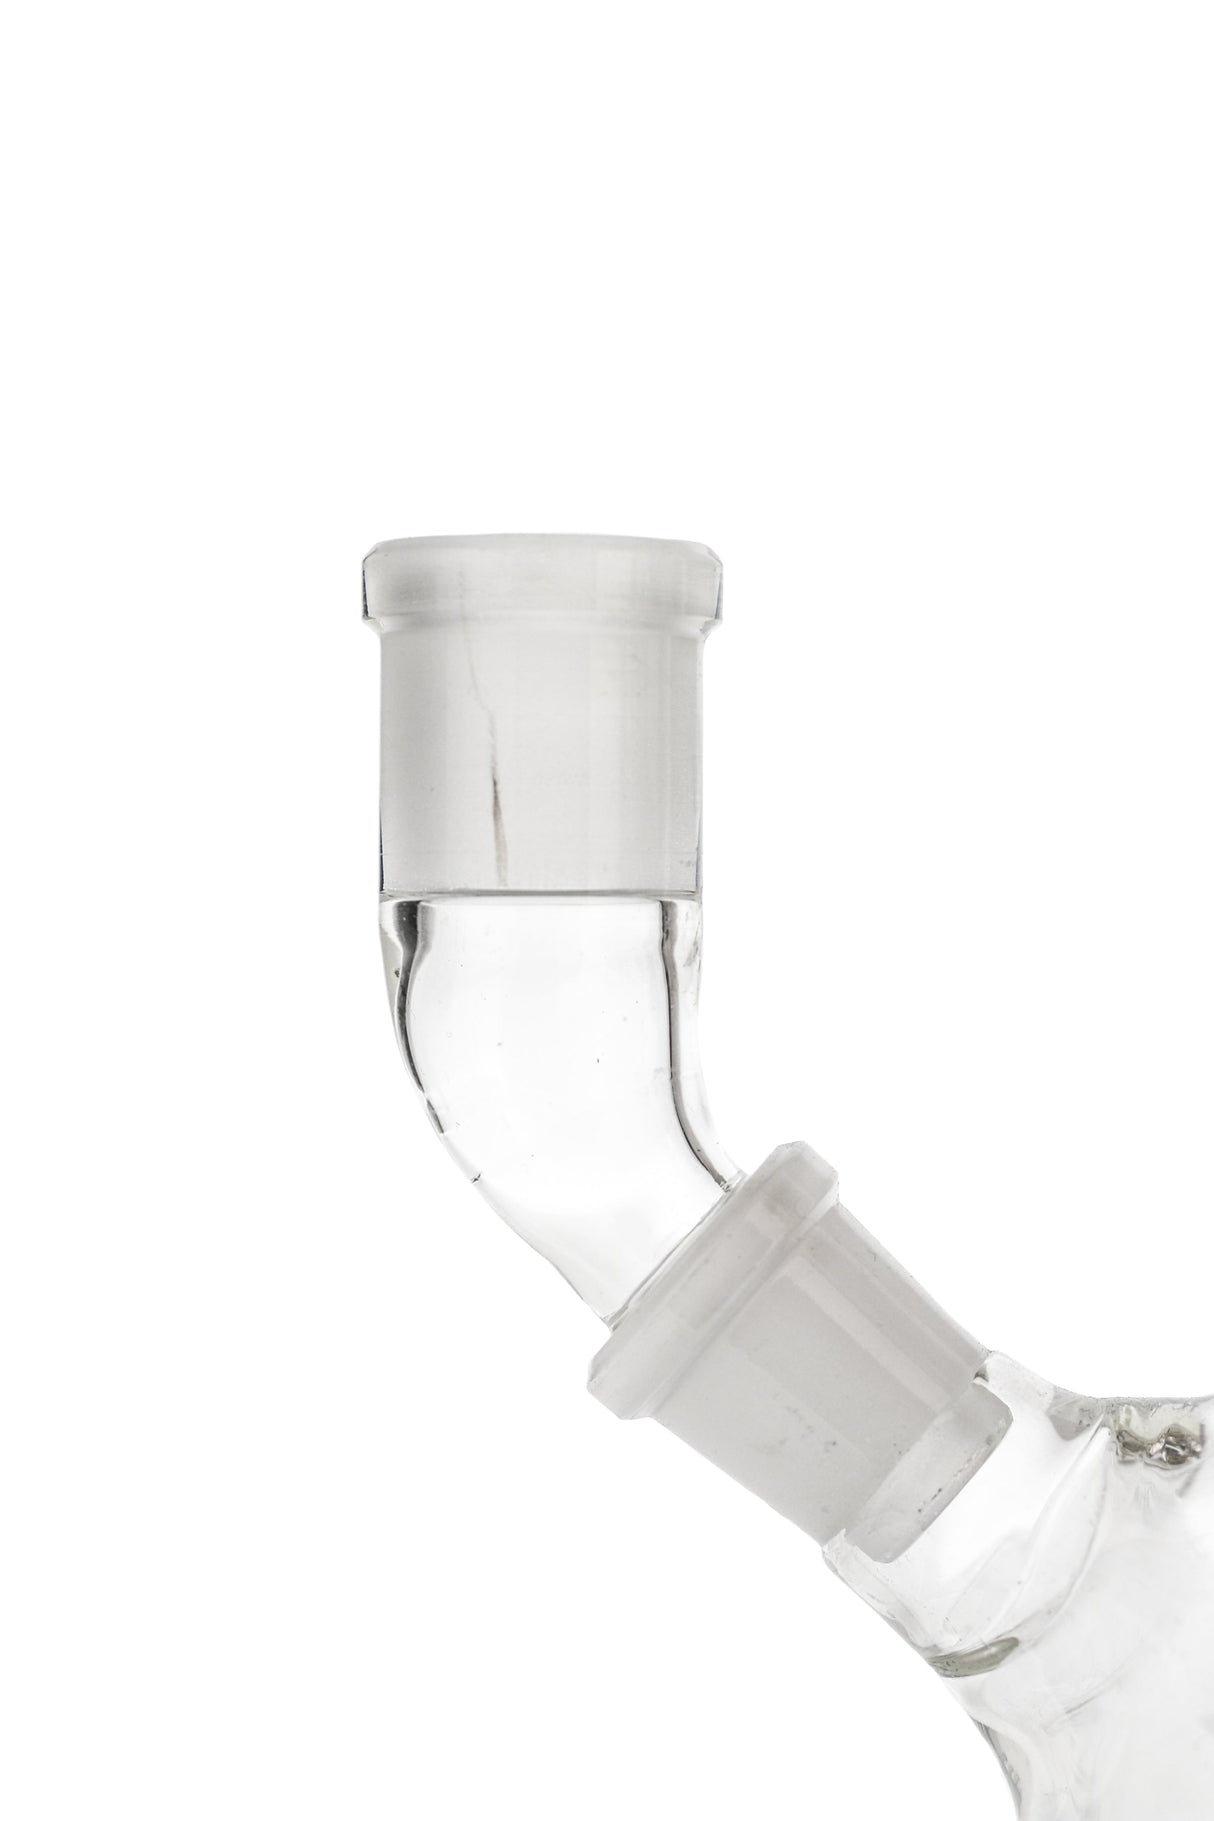 TAG Quartz Angle Adapter for Bongs, Clear Close-up Side View, Versatile Joint Sizes